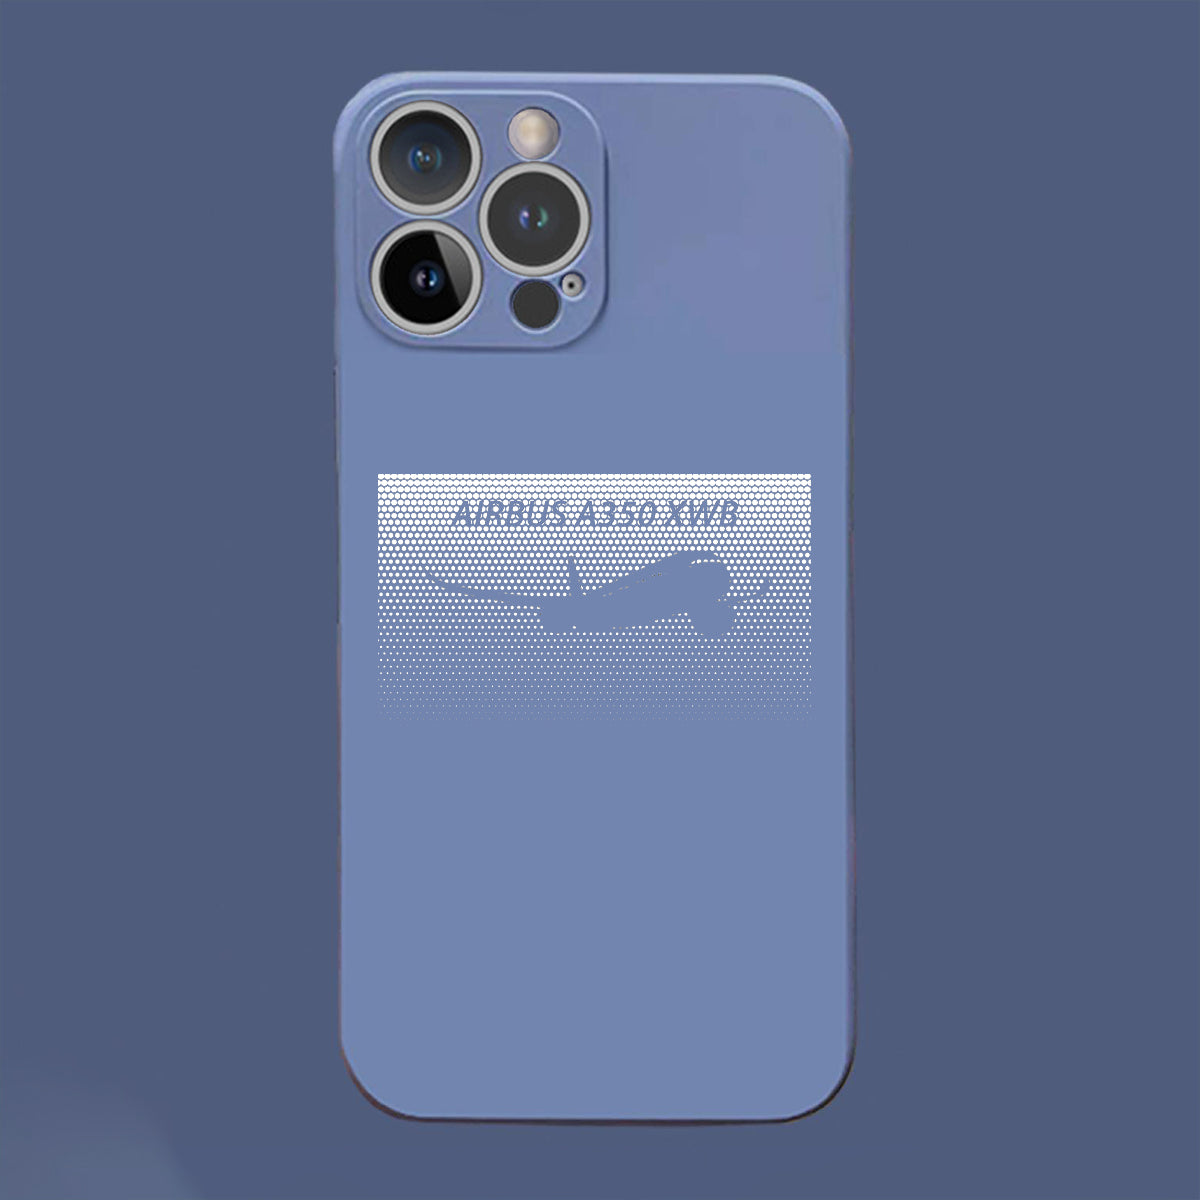 Airbus A350XWB & Dots Designed Soft Silicone iPhone Cases